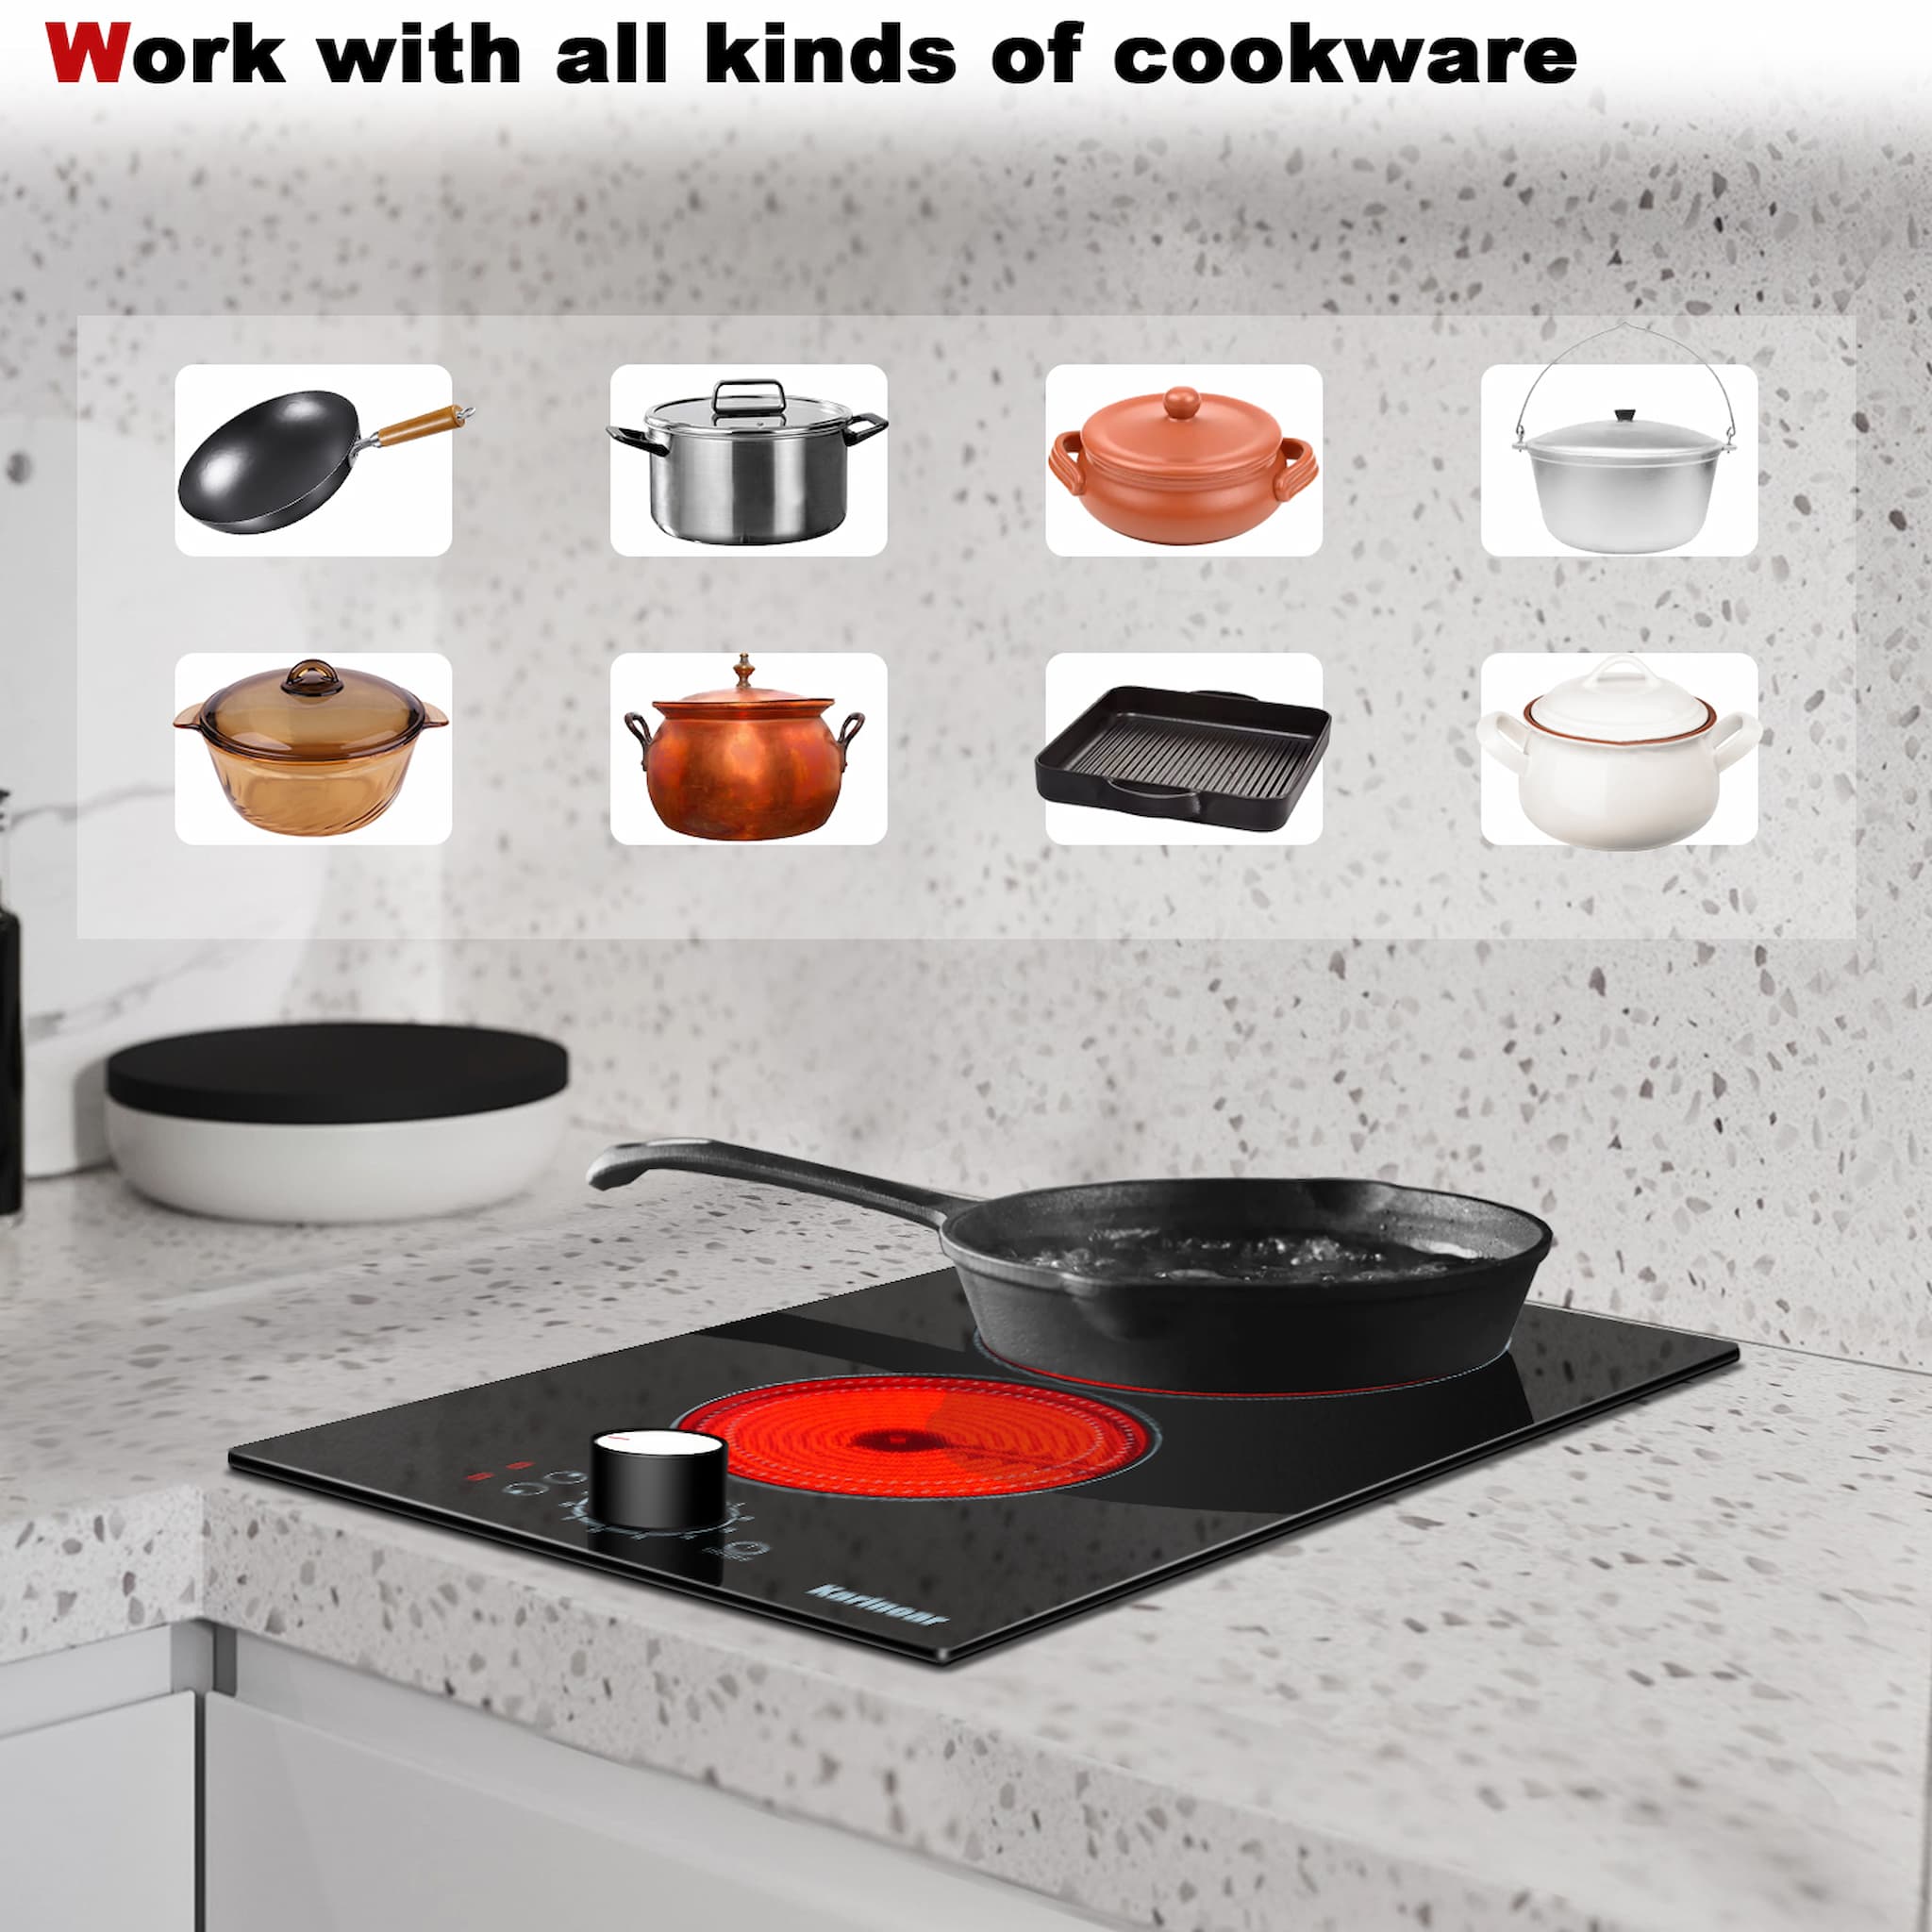 Compatible With All Types of Cookwares 